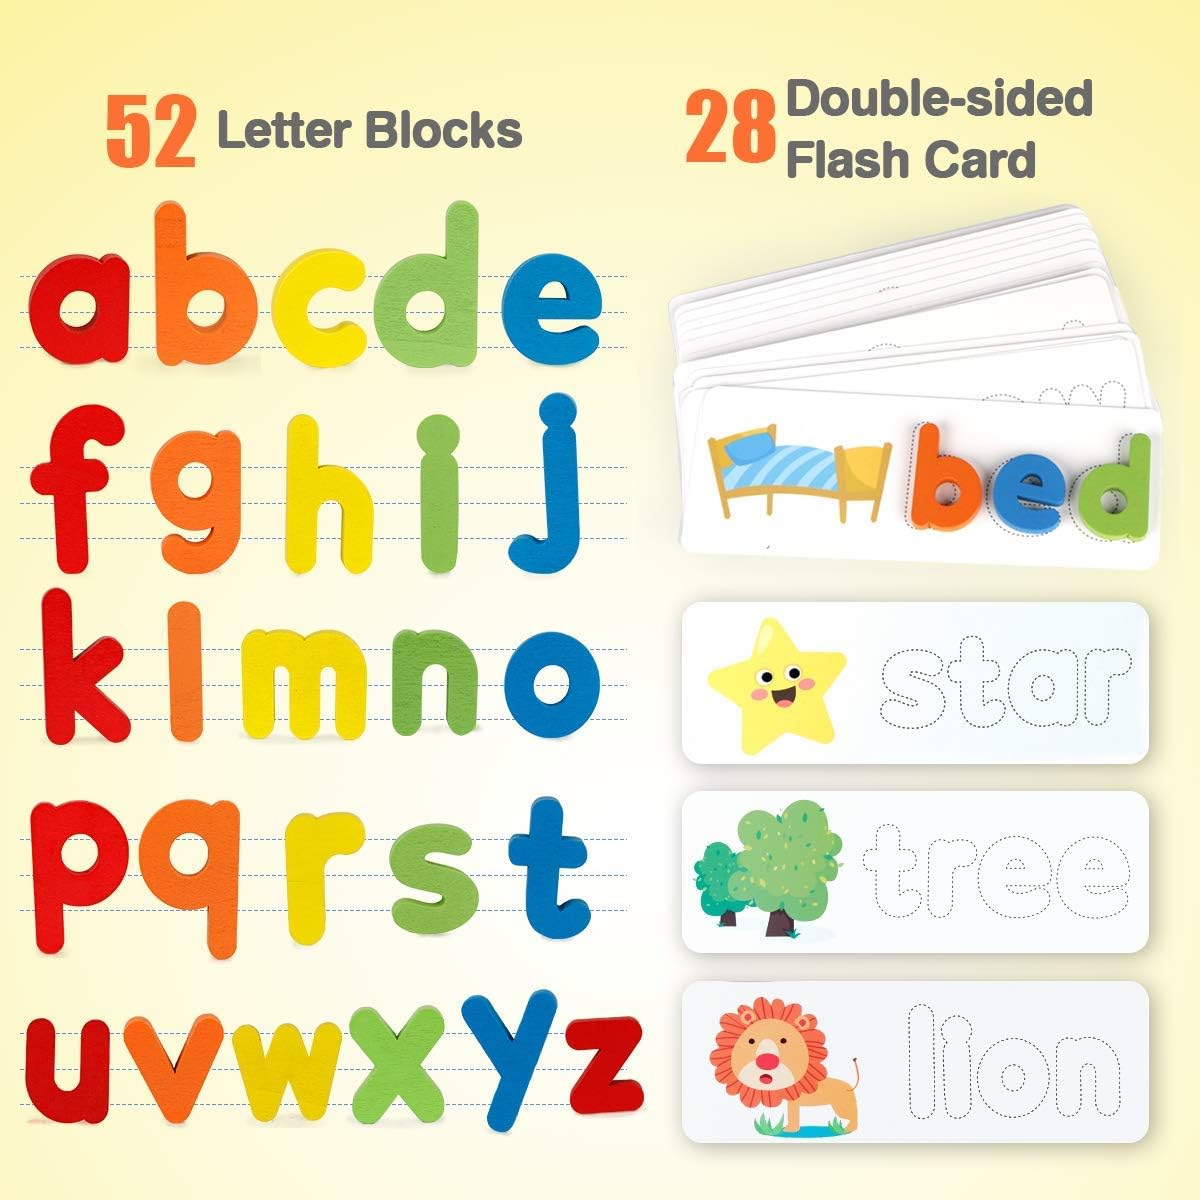 Read Spelling Learning Toy, Wooden Alphabet Flash Cards Matching Sight Words ABC Letters Recognition Game Preschool Educational Tool Set for 3 4 5 Years Old Girls and Boys Kids